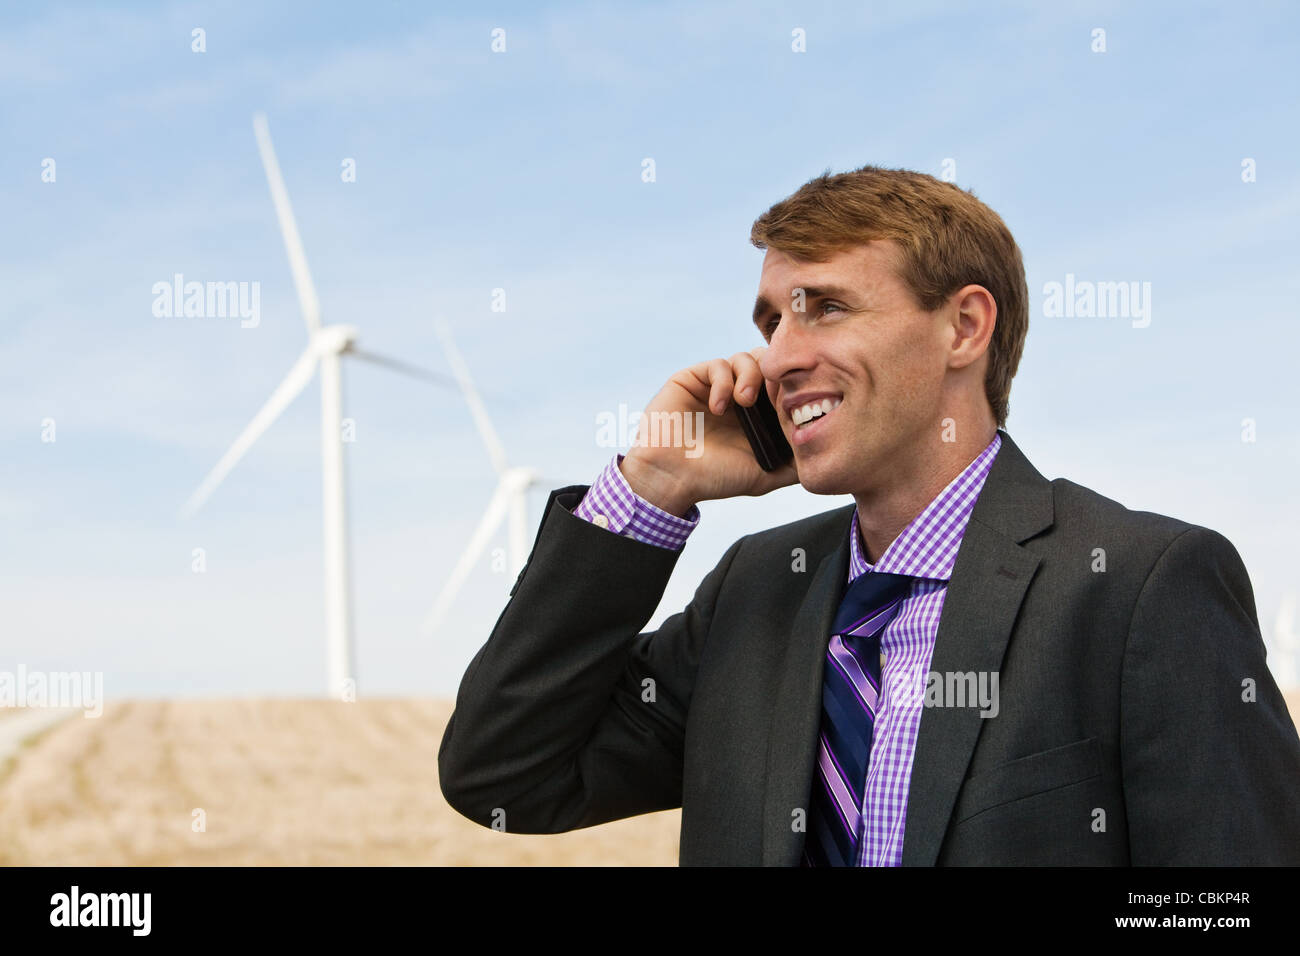 Man on mobile phone in front of wind turbines Stock Photo